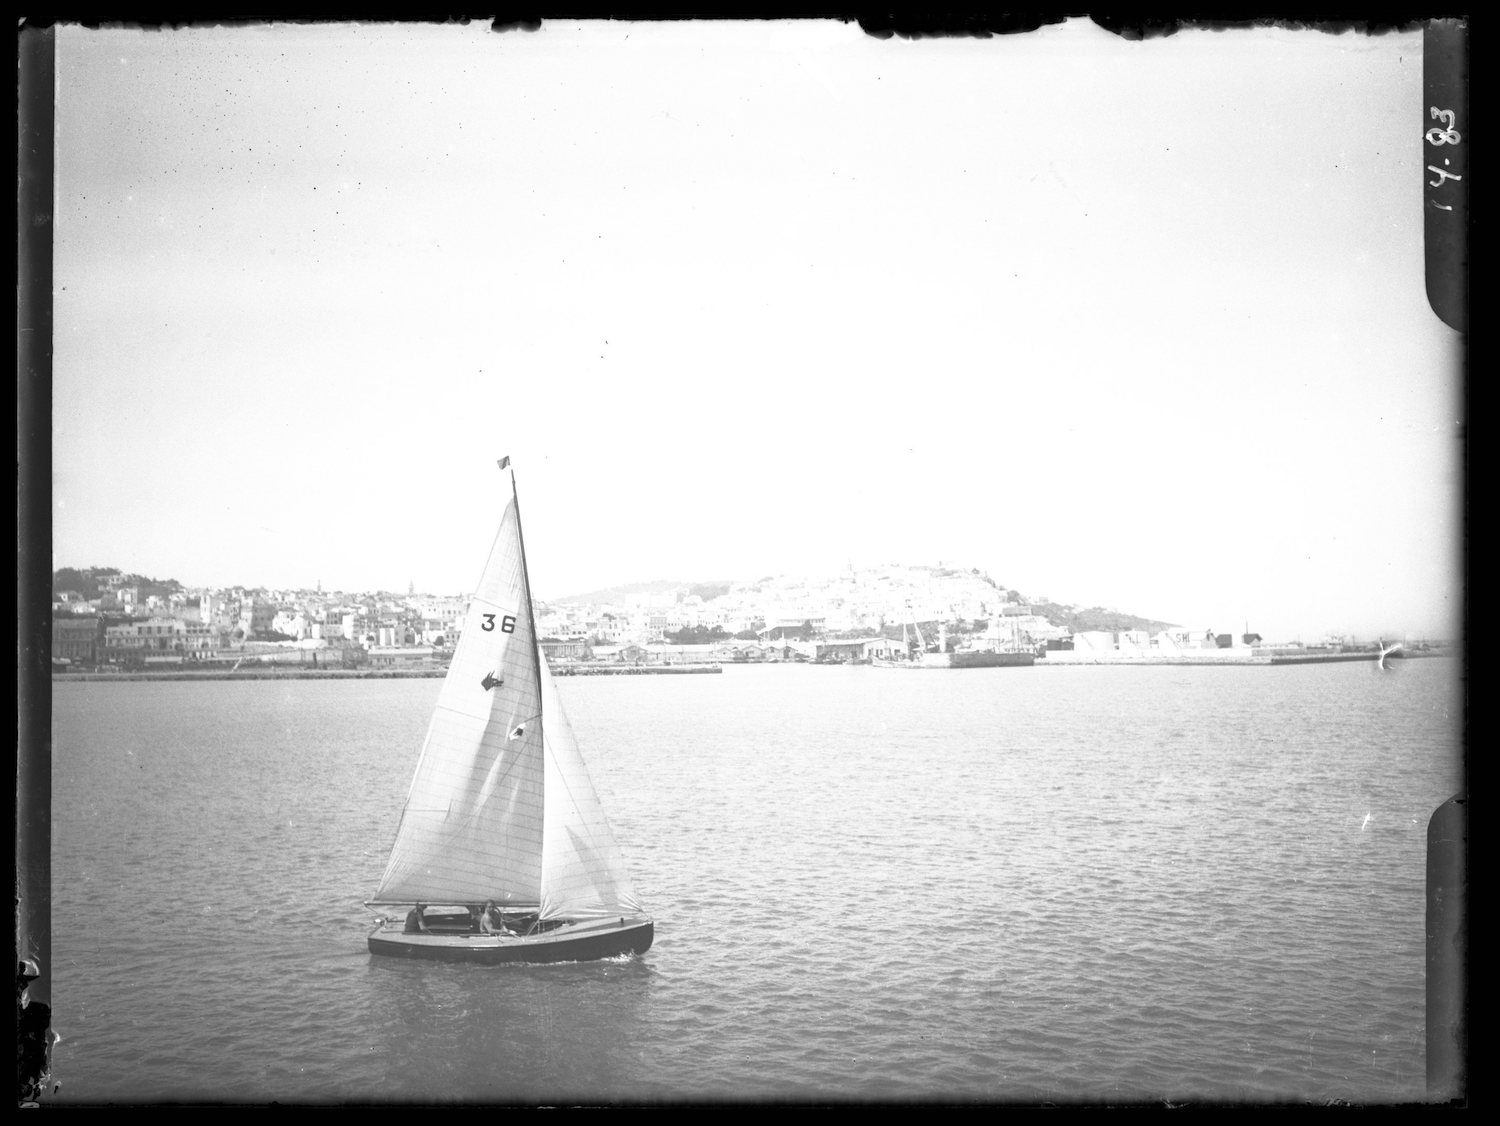 View of a sailboat in the Tangier harbor